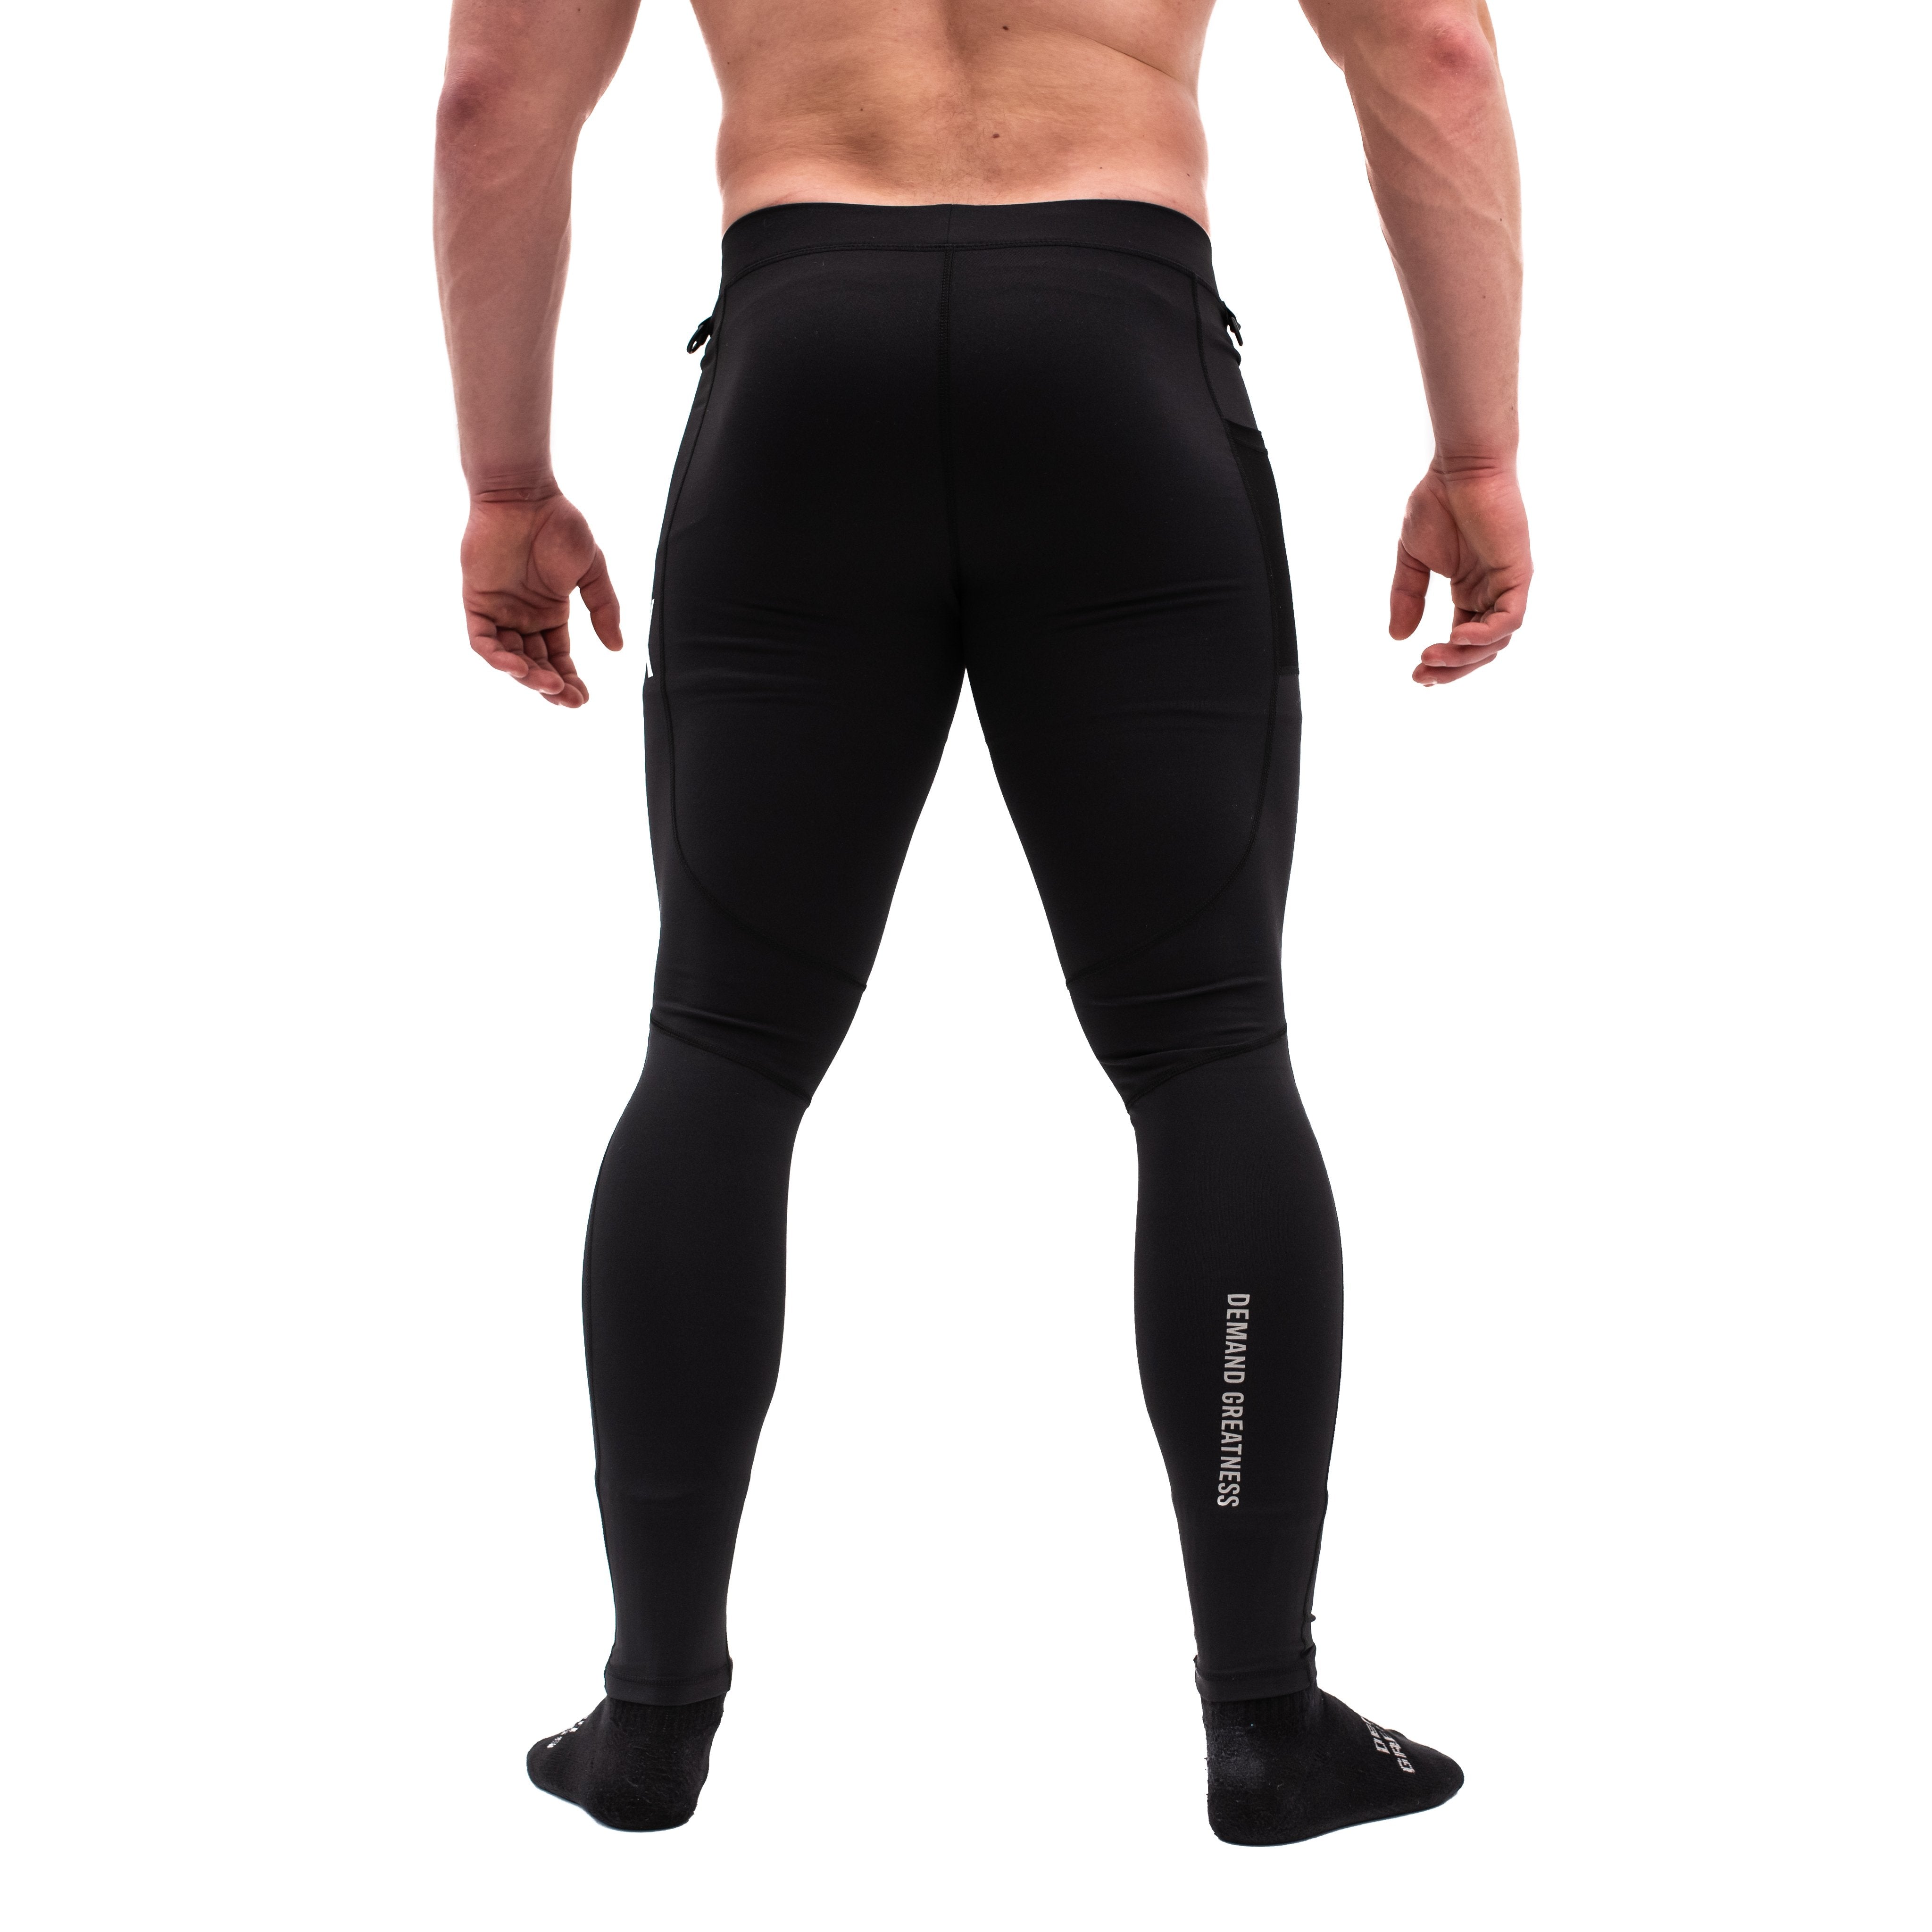 Ox Men's Compression Pants - Stealth  A7 Europe Shipping to EU – A7 EUROPE